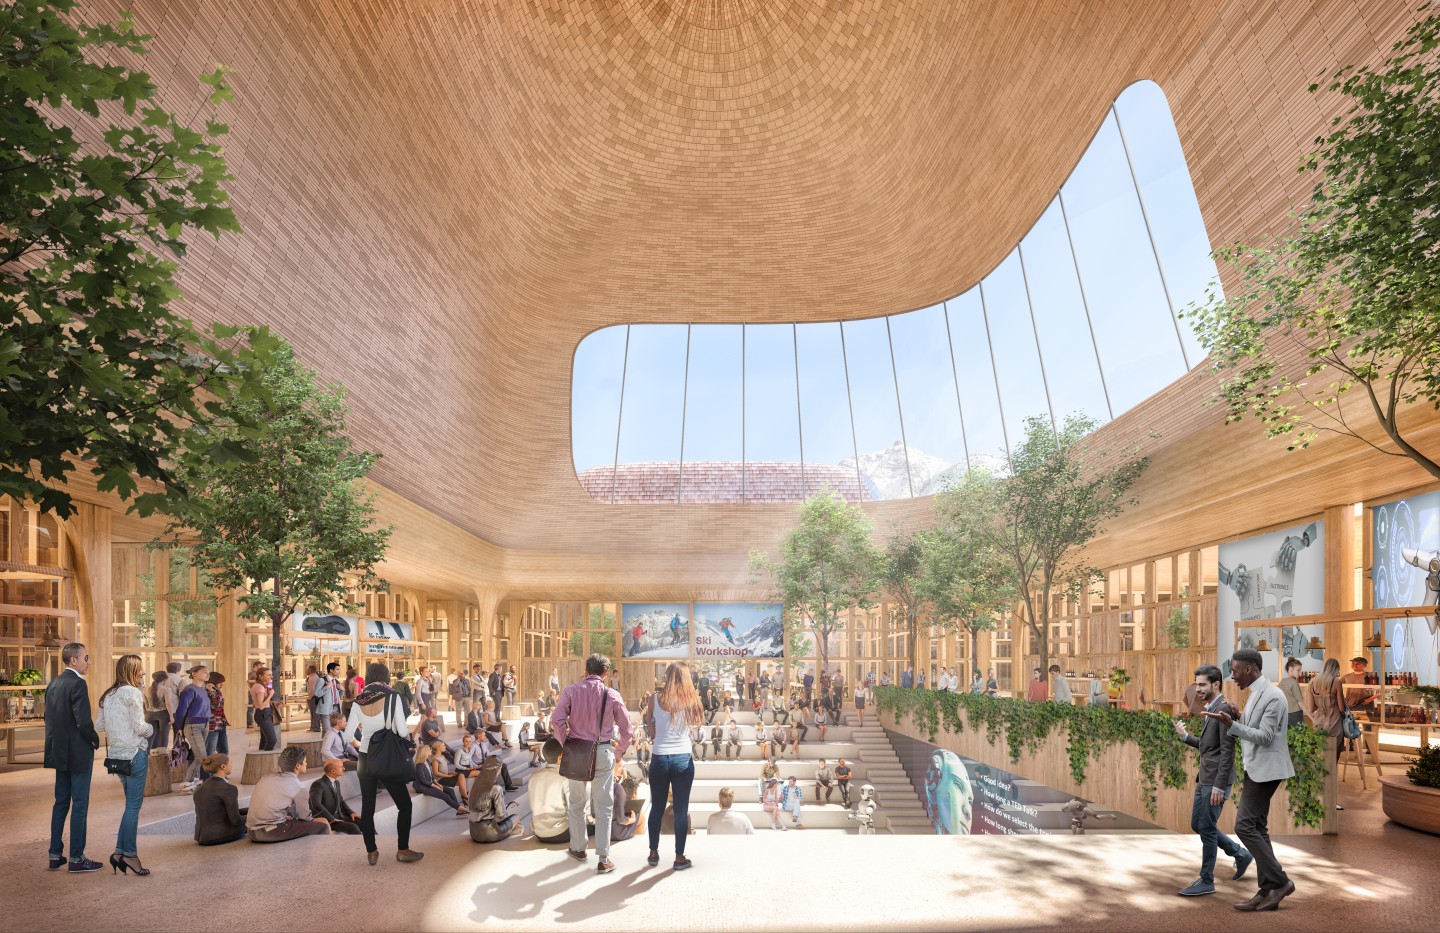 InnHub La Punt's interior will feature skylights to maximize natural light inside